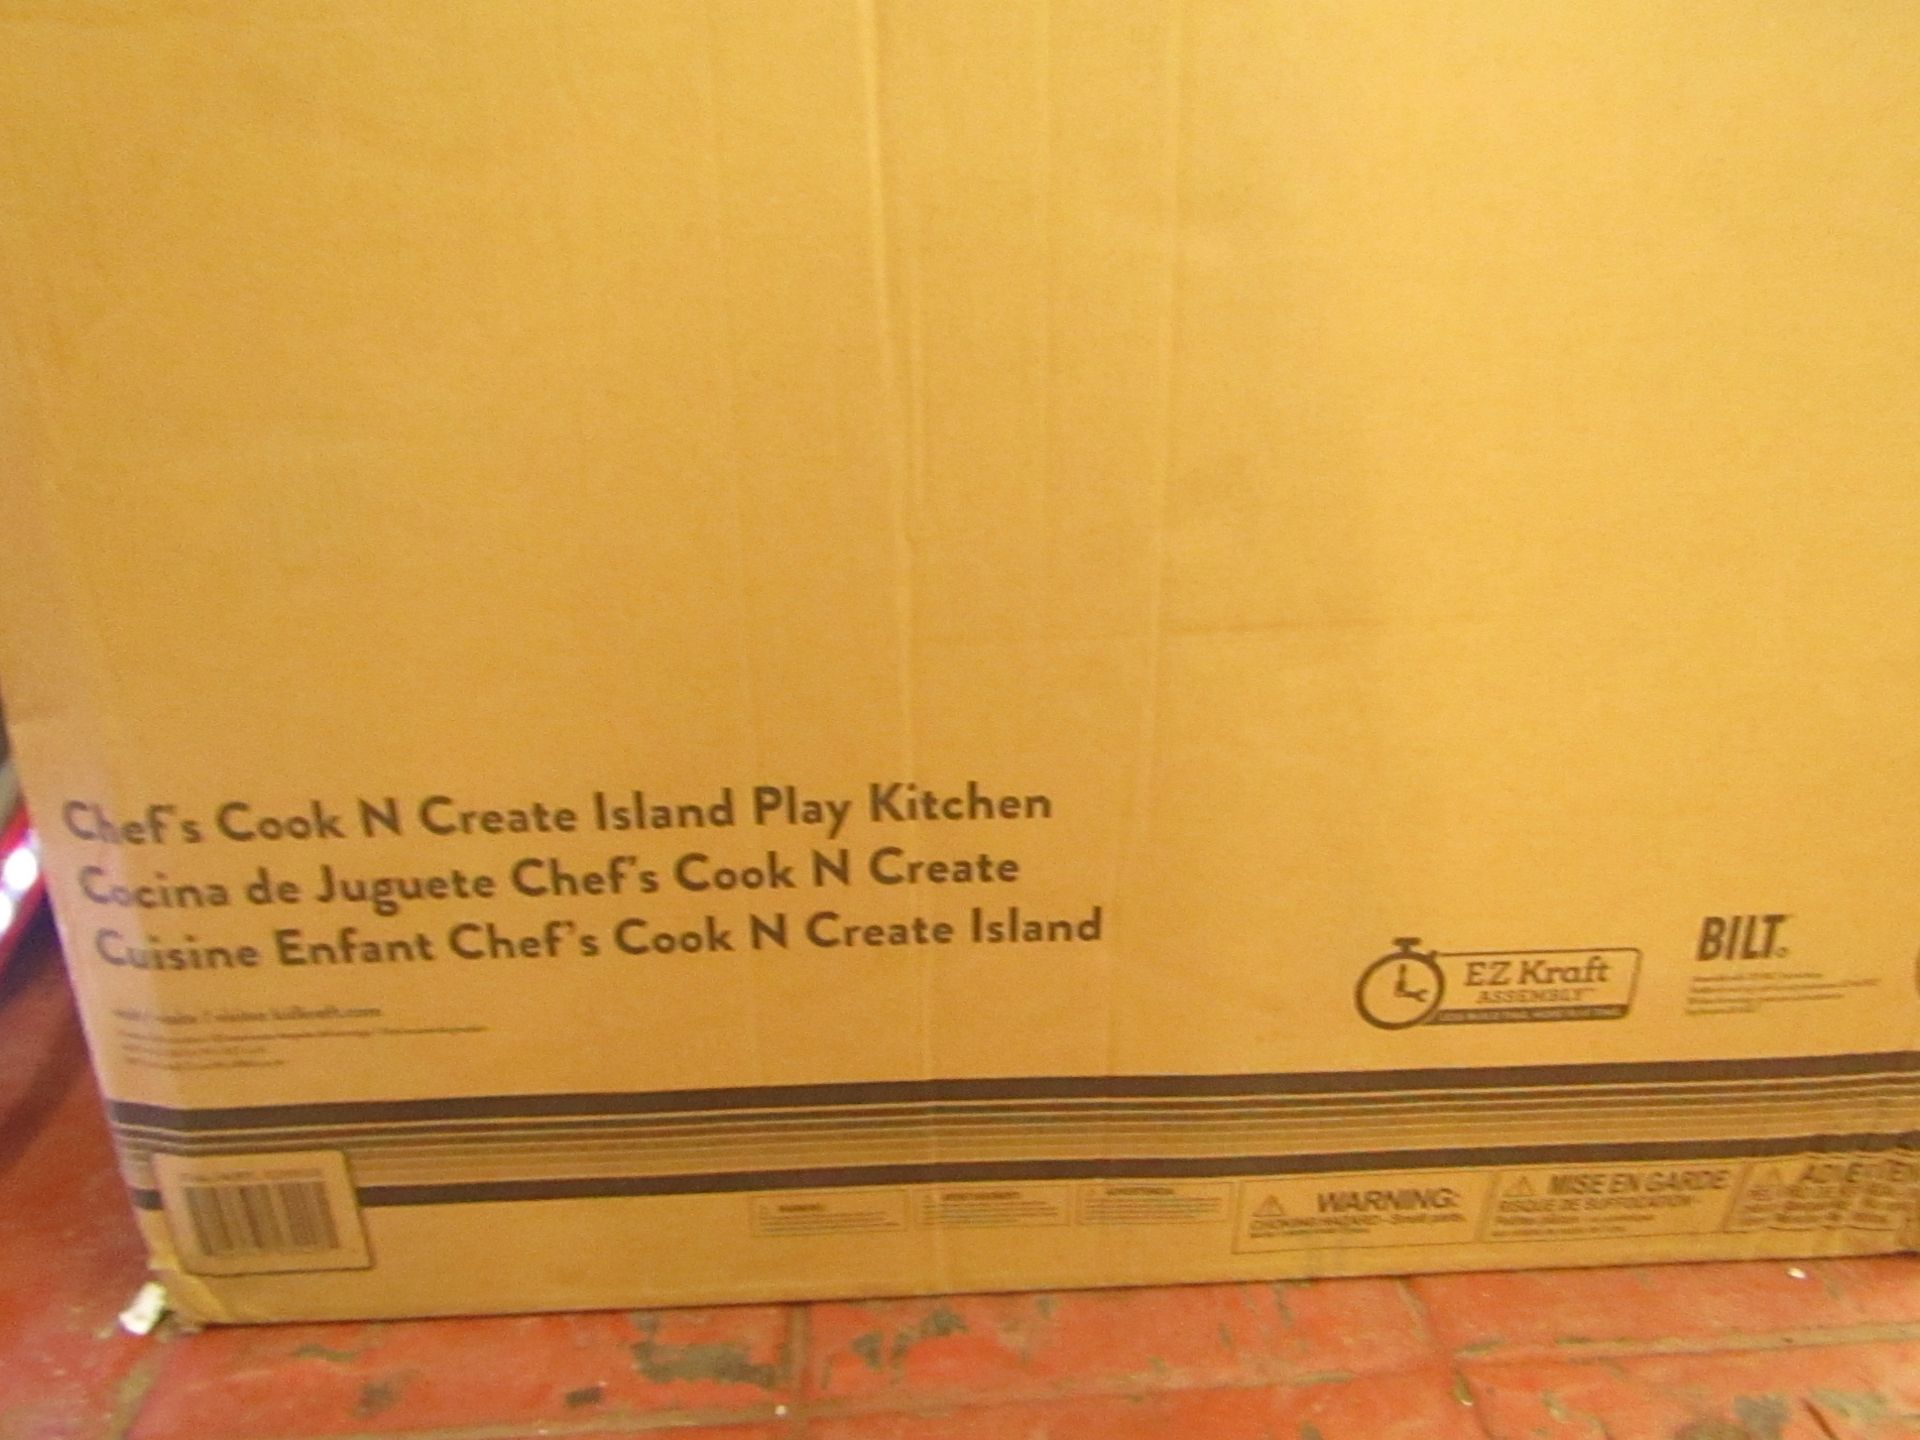 Kid Kraft chefs cook and create island play kitchen, unchecked and boxed.